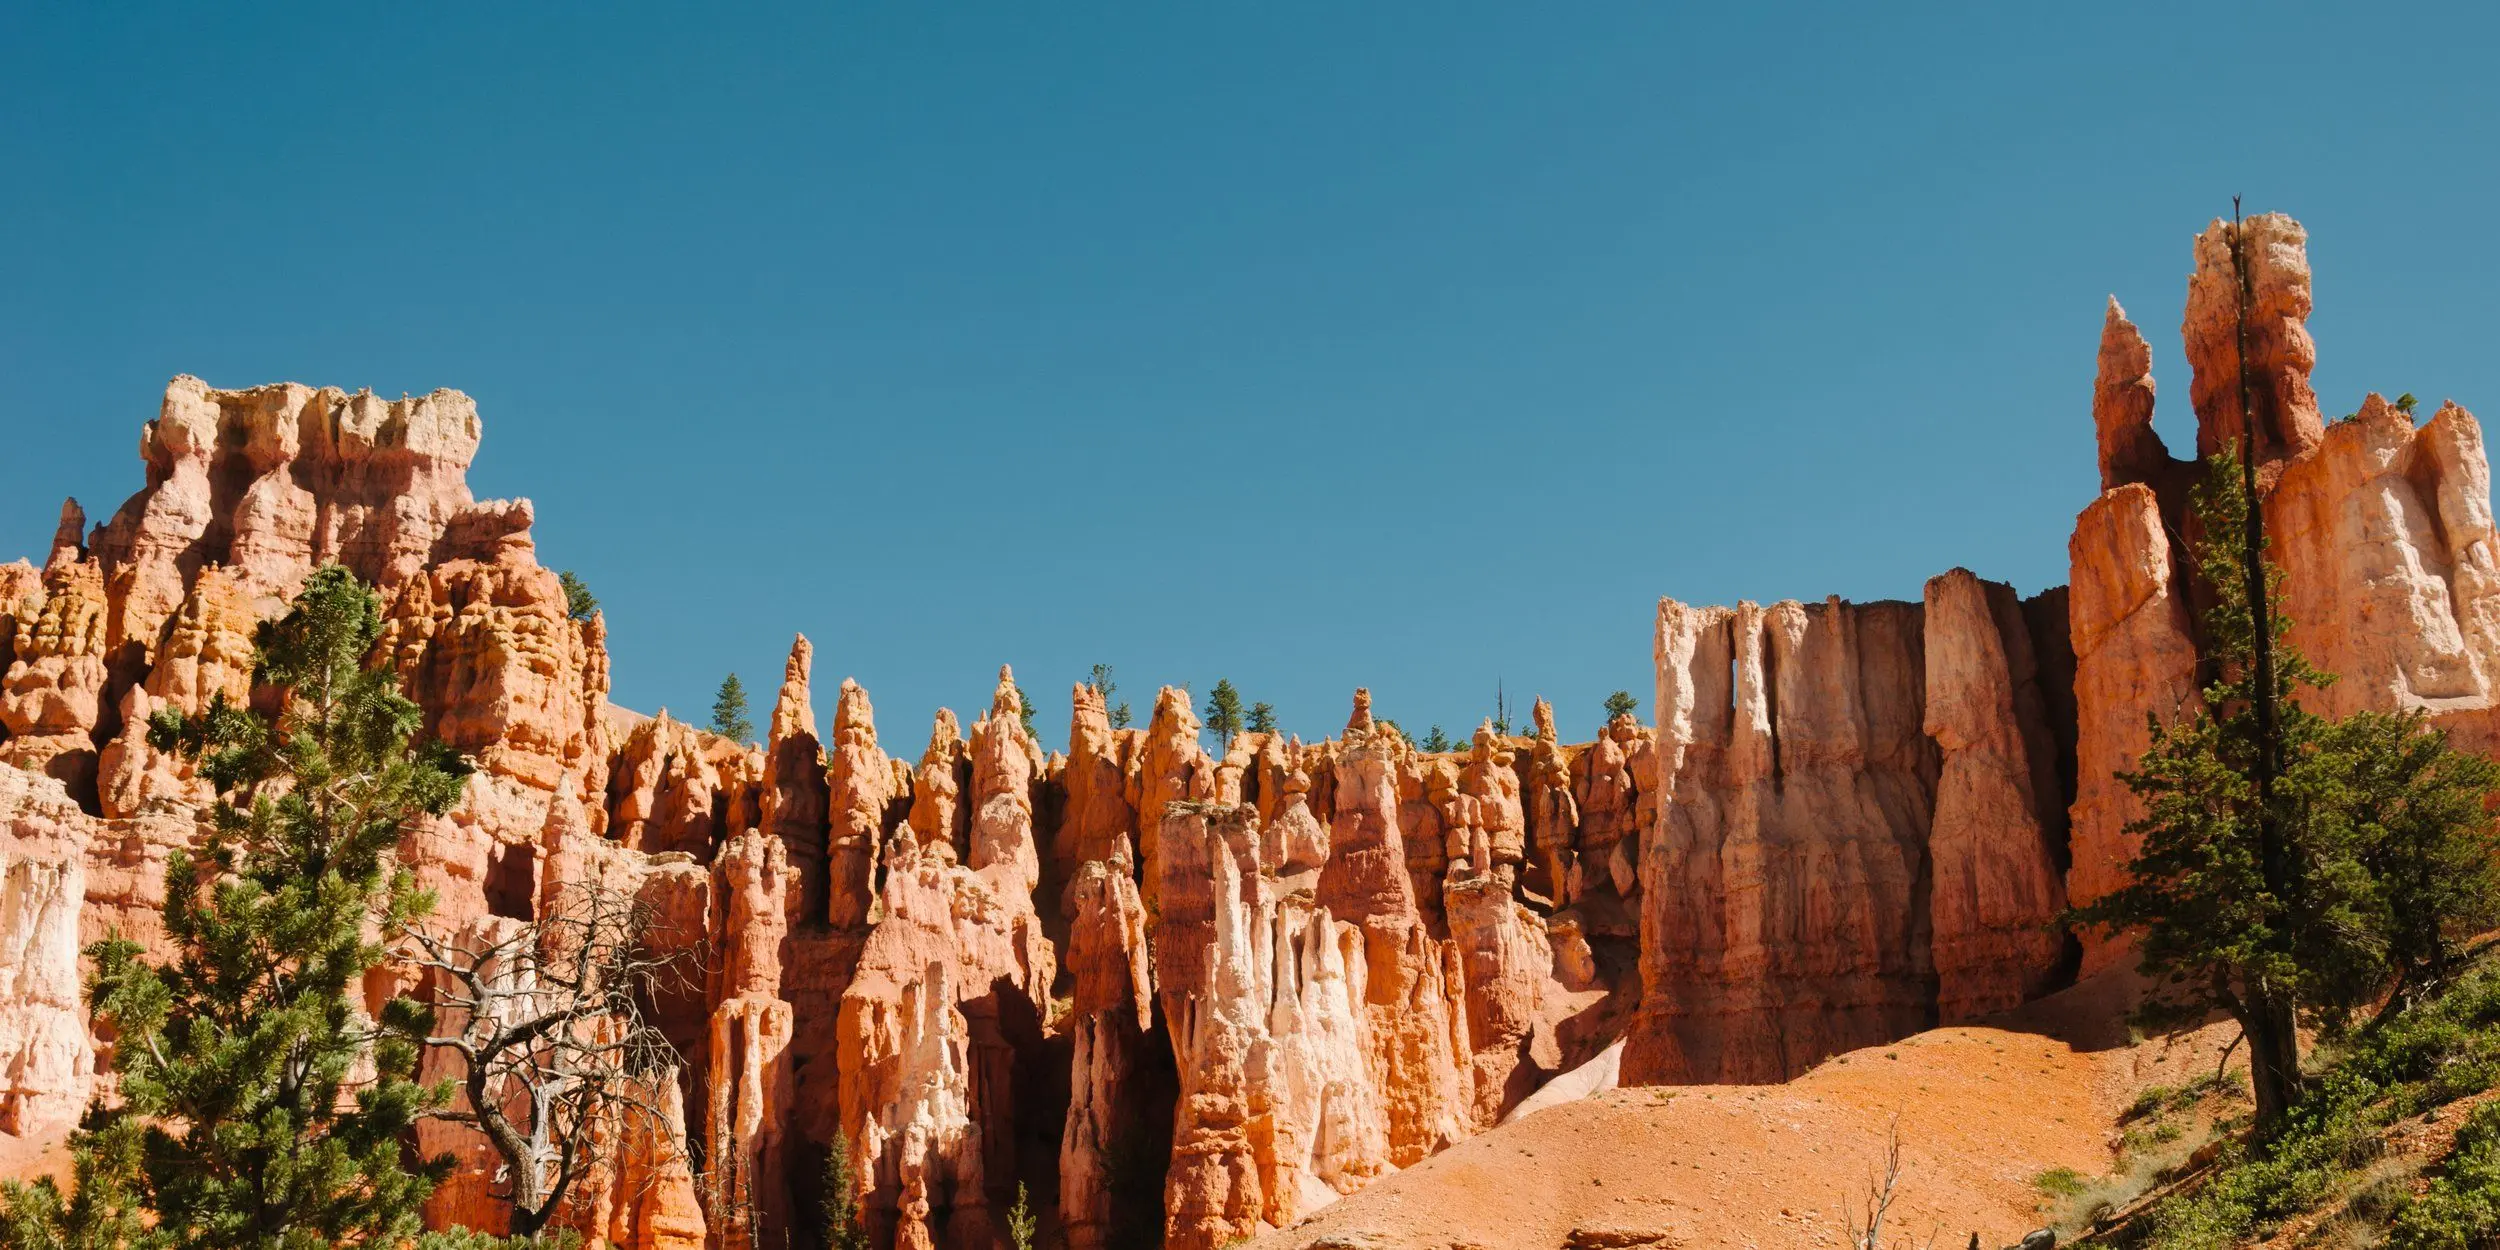 Orange Bryce Canyon hoodoos bordered by green trees, all under clear blue skies through Queens Garden. Midday.